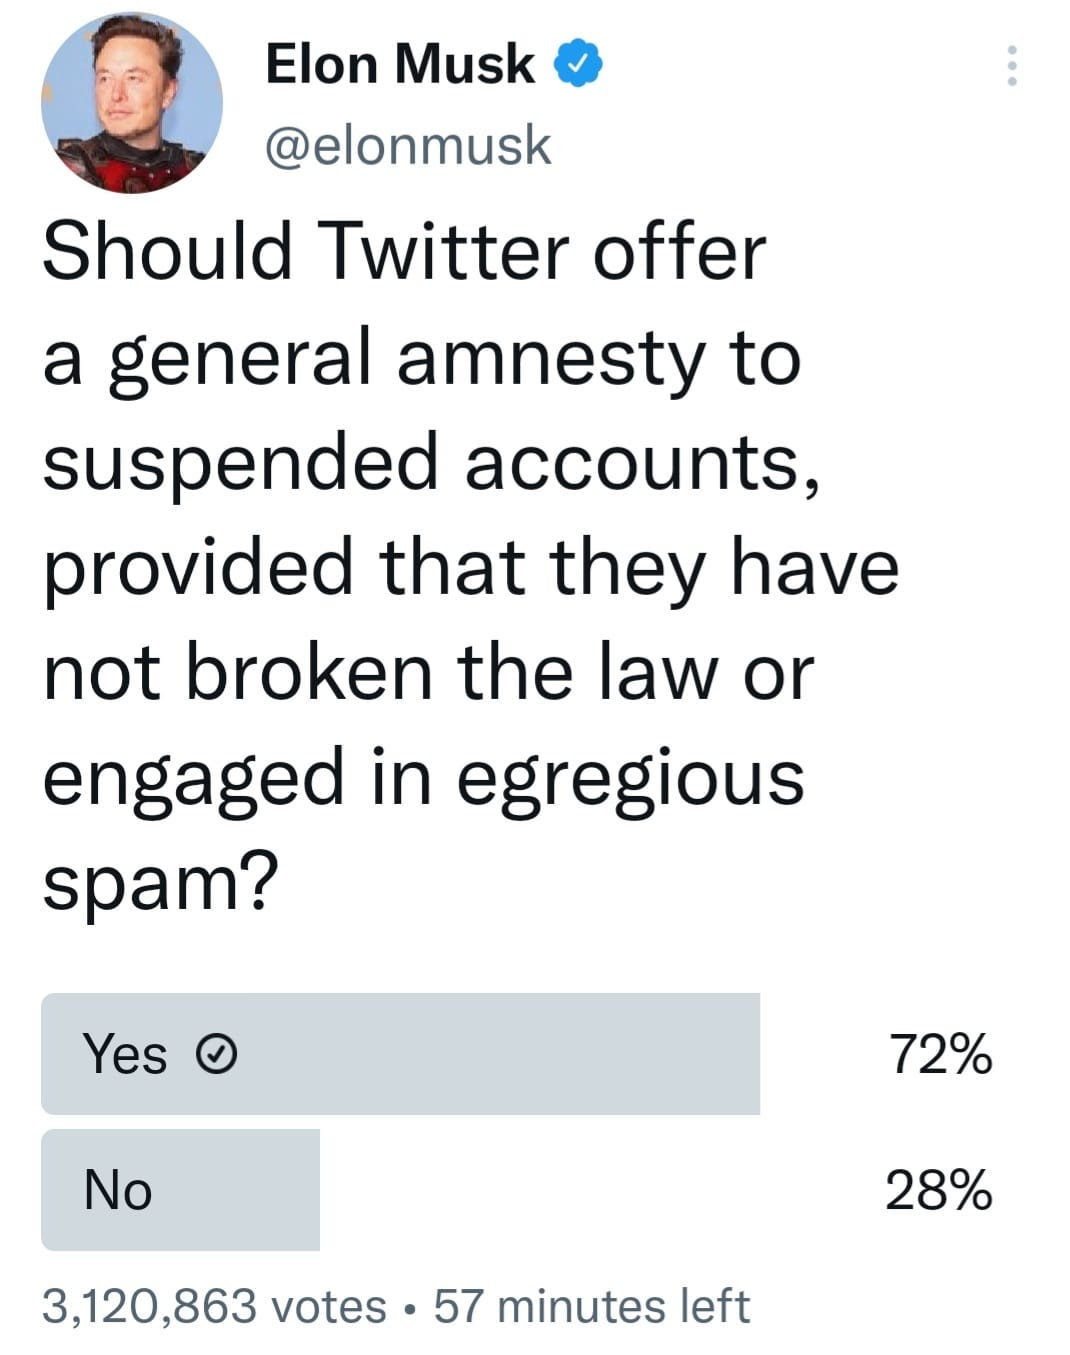 May be a Twitter screenshot of 1 person and text that says 'Elon Musk @elonmusk Should Twitter offer a general amnesty to suspended accounts, provided that they have not broken the law or engaged in egregious spam? Yes No 72% 28% 3,120,863 votes. 57 minutes left'